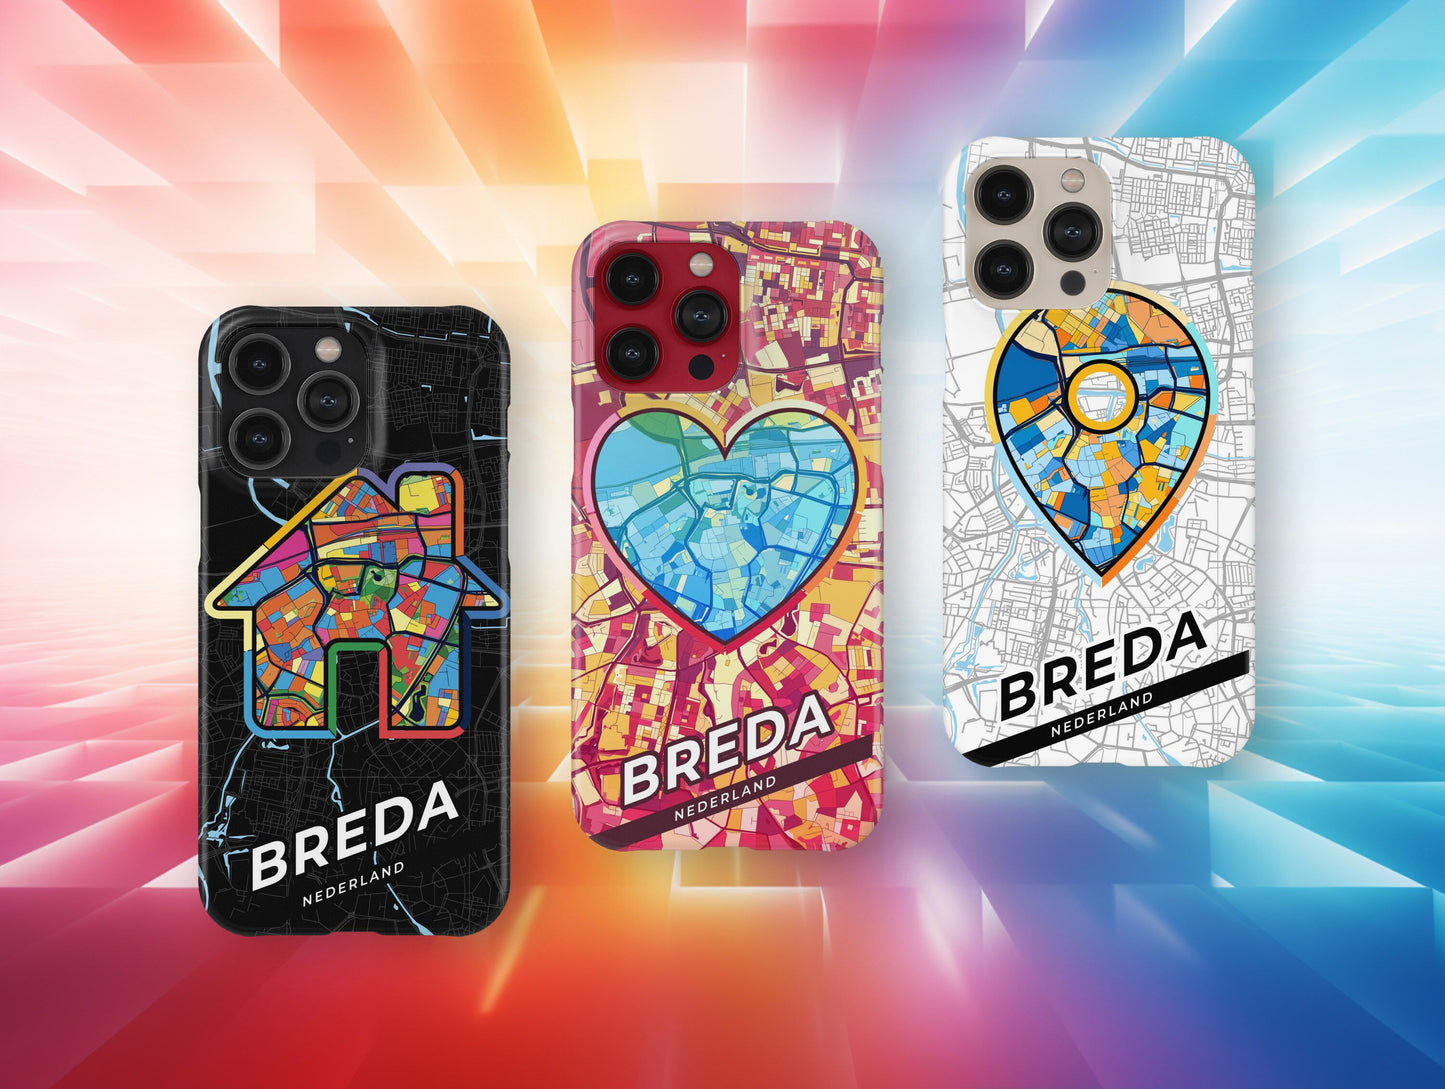 Breda Netherlands slim phone case with colorful icon. Birthday, wedding or housewarming gift. Couple match cases.